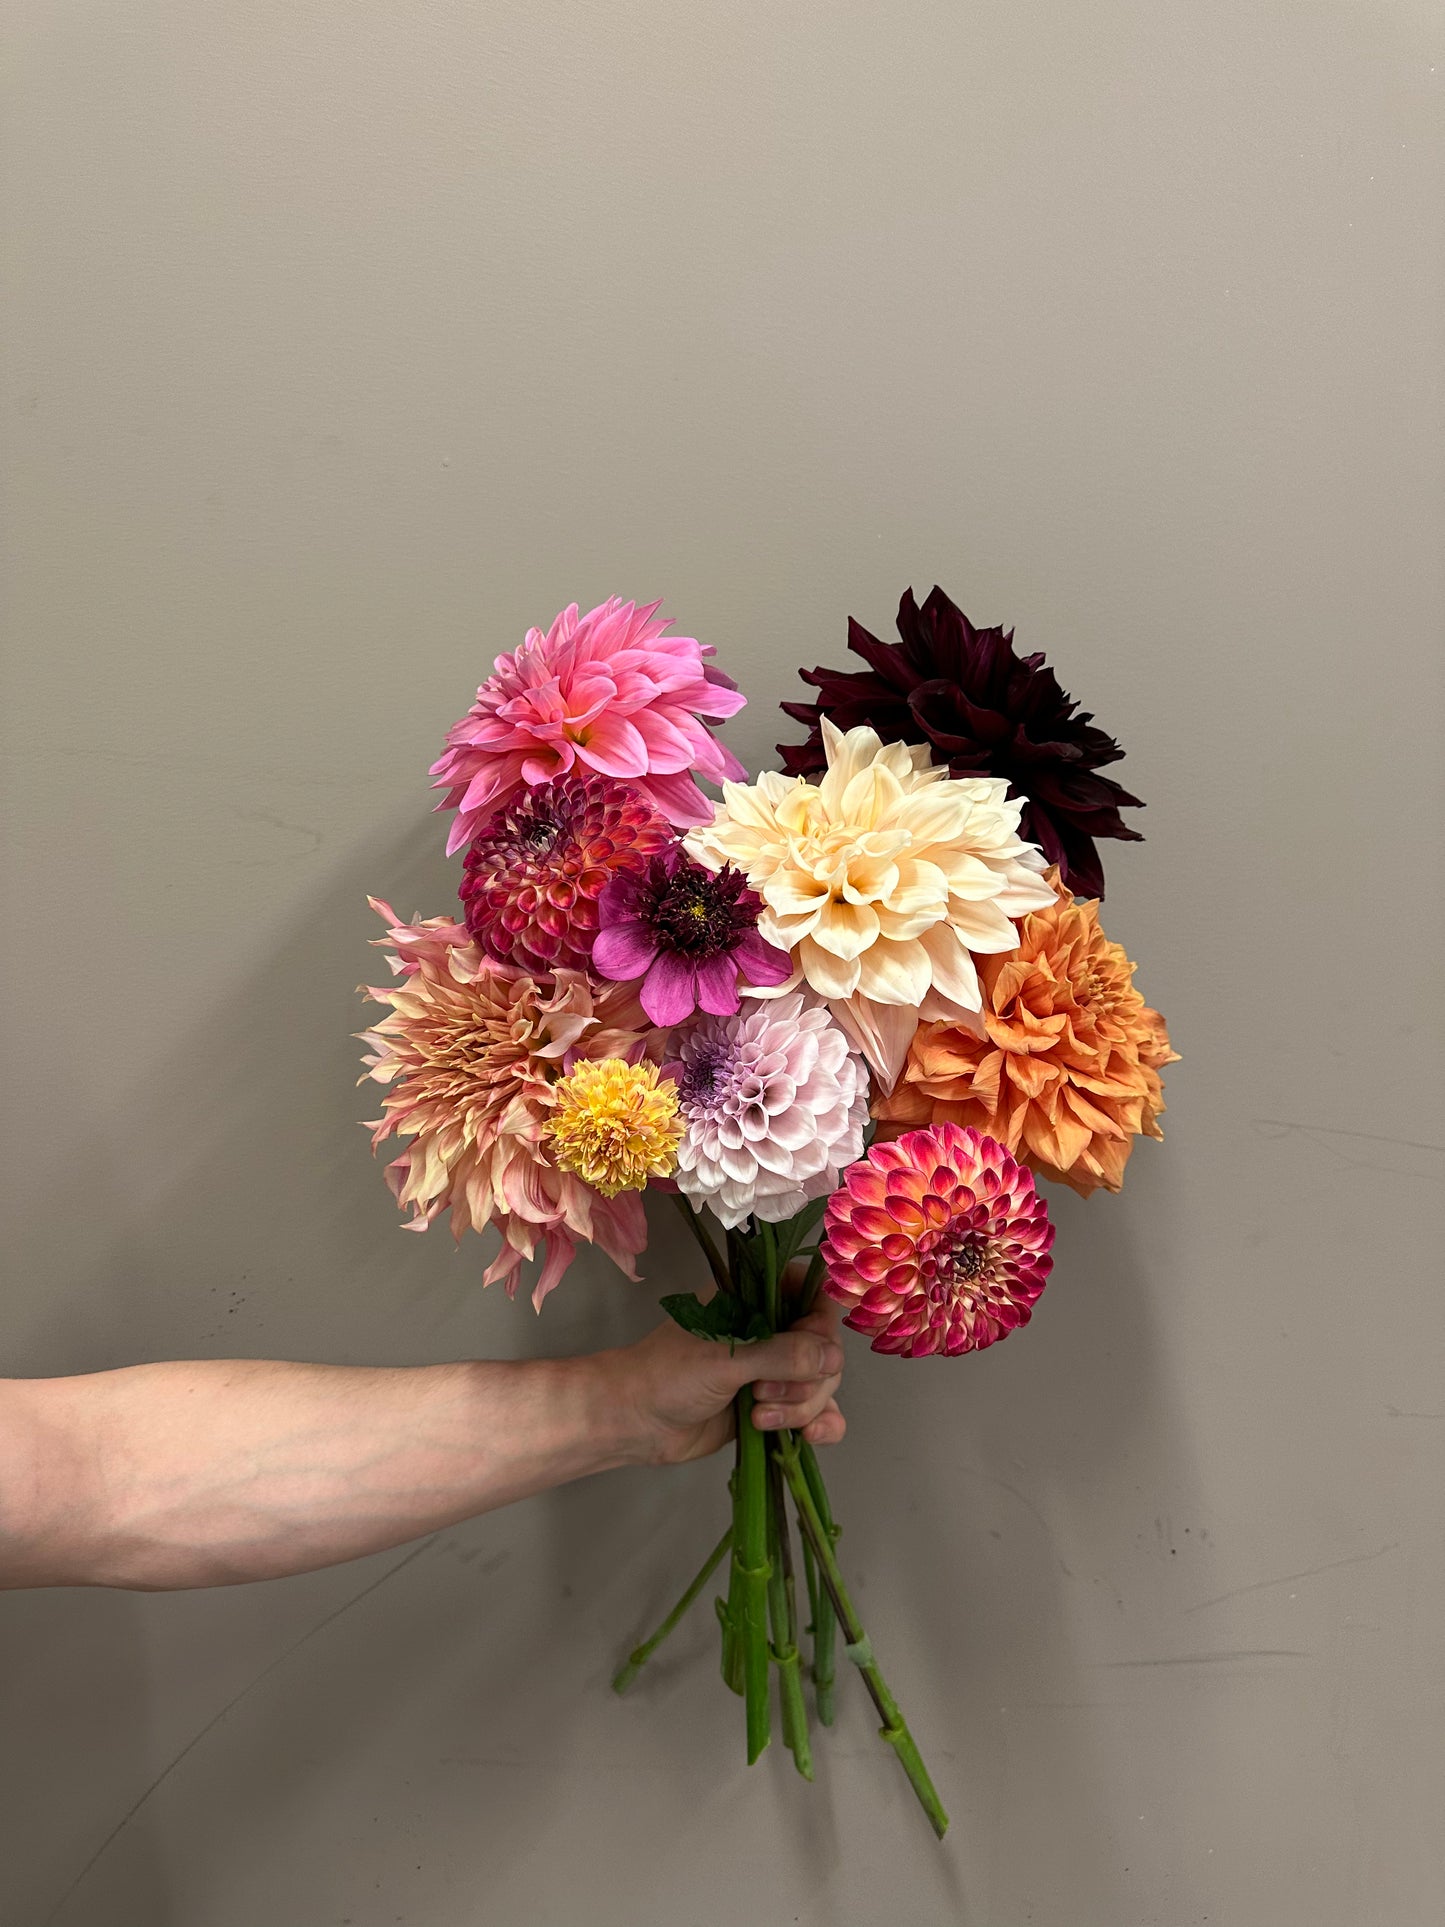 Flower of the Week - Local Canberra Dahlias